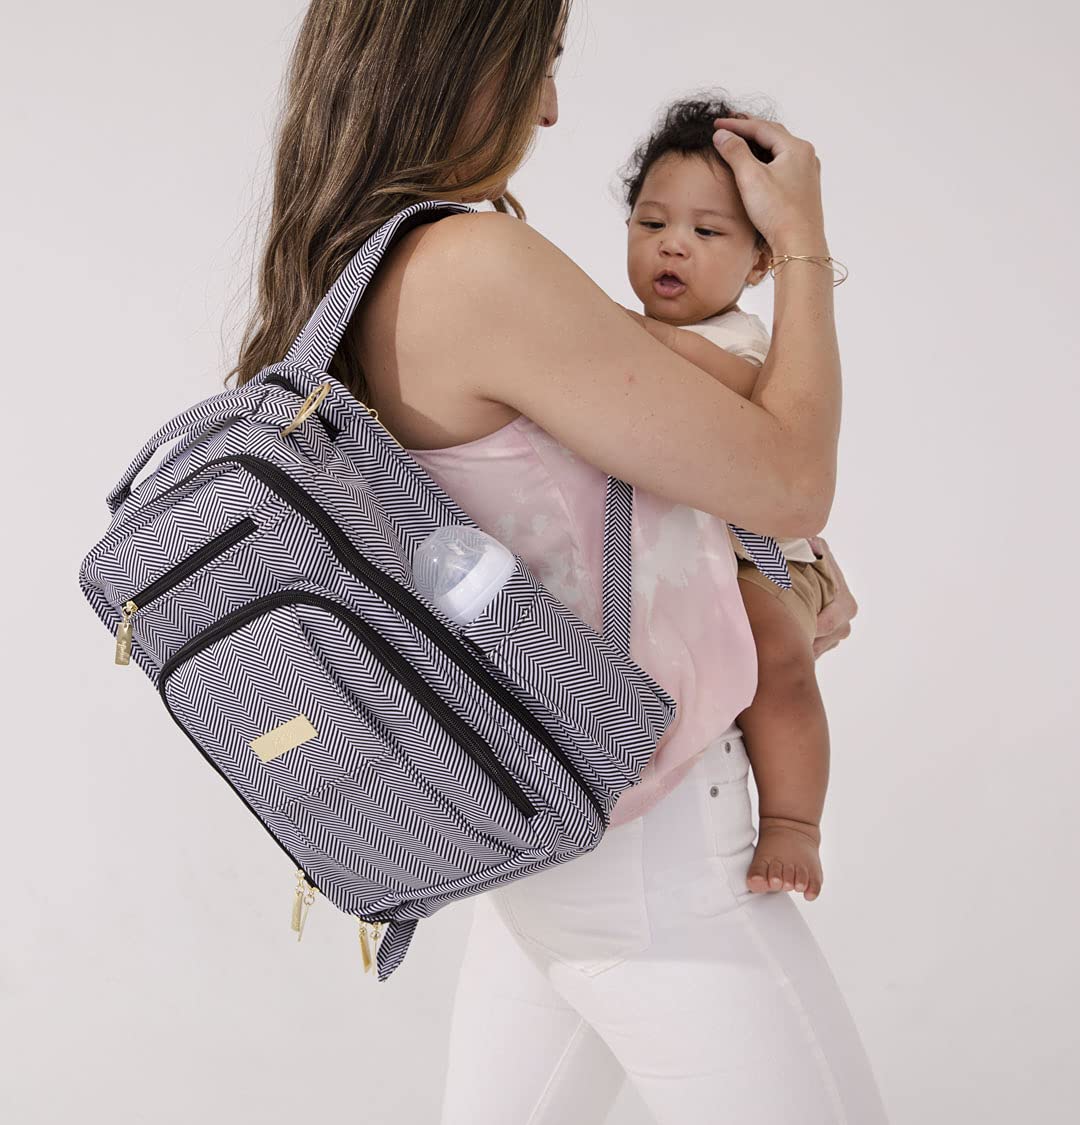 JuJuBe Be Right Back Unisex Travel Backpack, Diaper Bag with Memory Foam Changing Pad, Be Fashionably Organized Anywhere